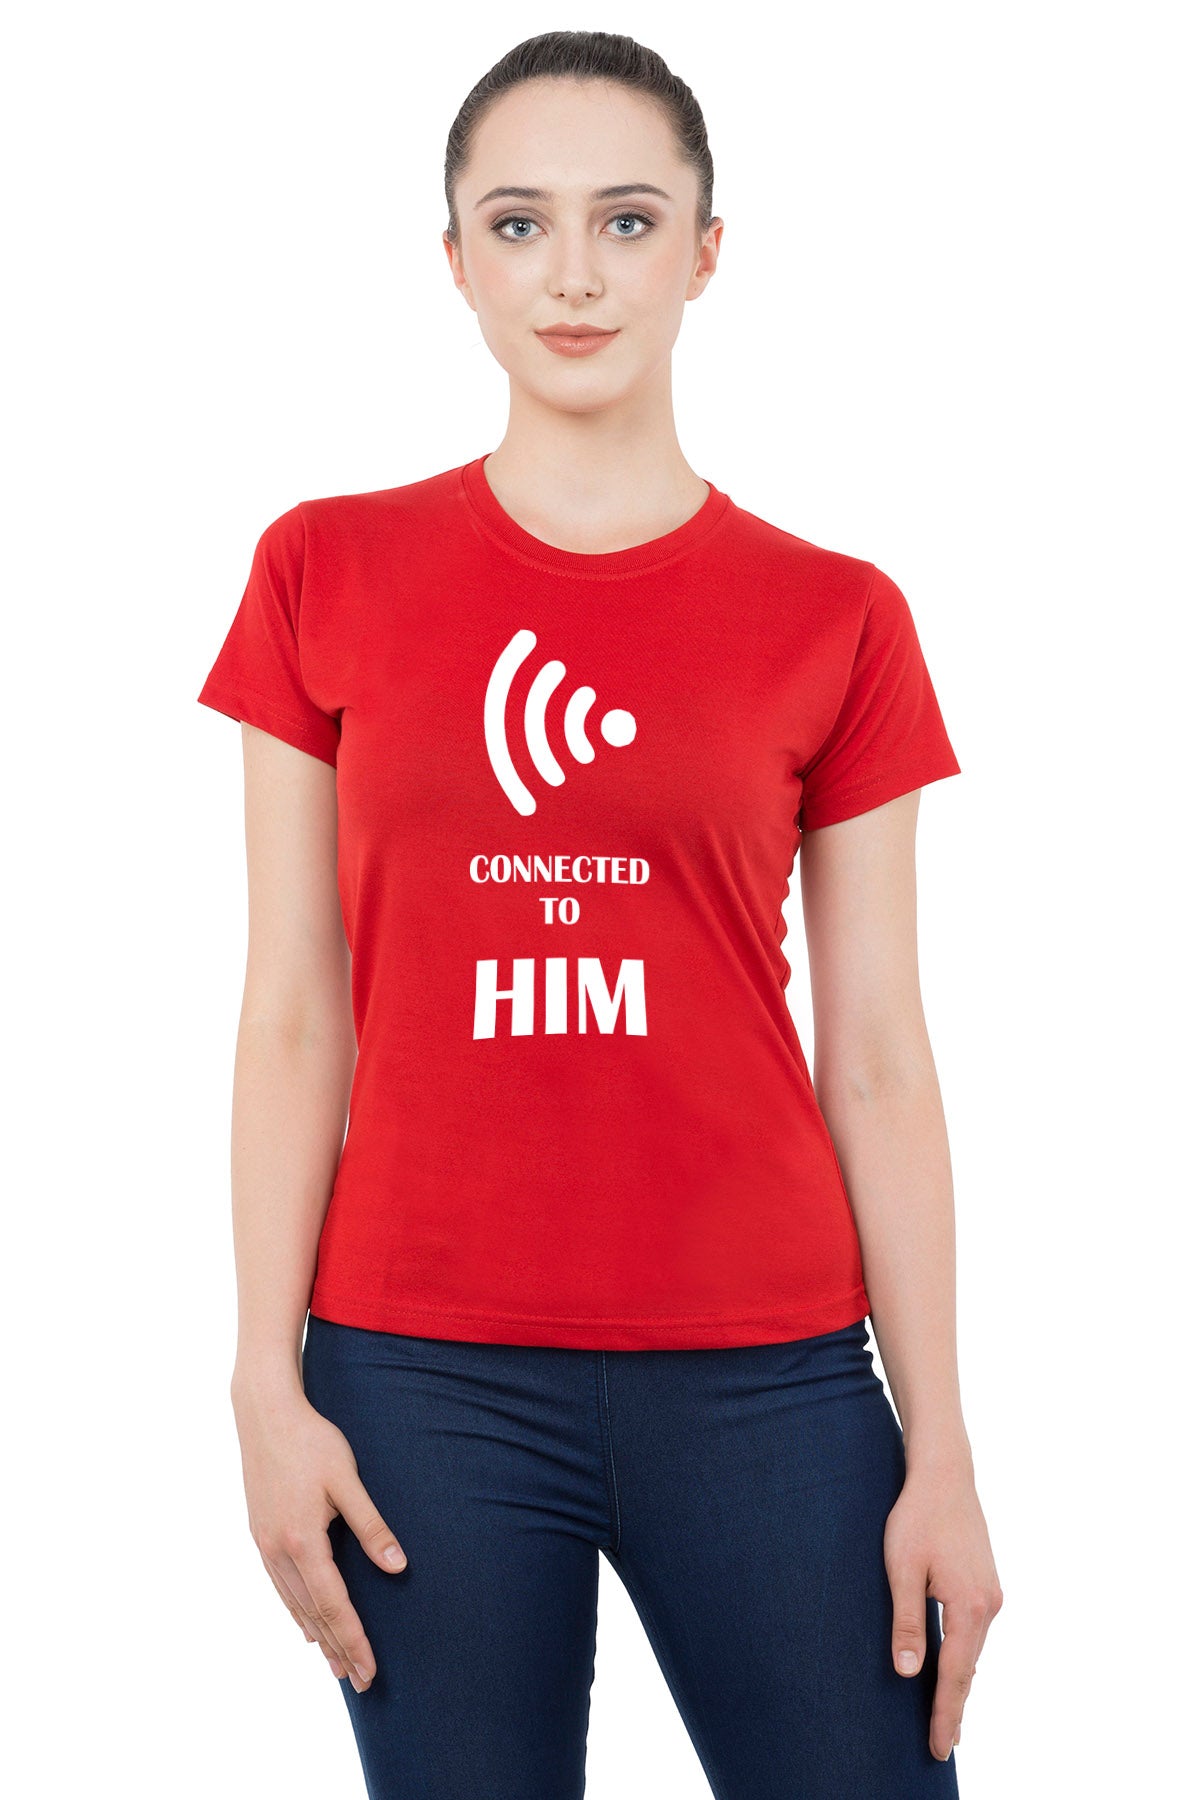 Connected to him/her matching Couple T shirts- Red